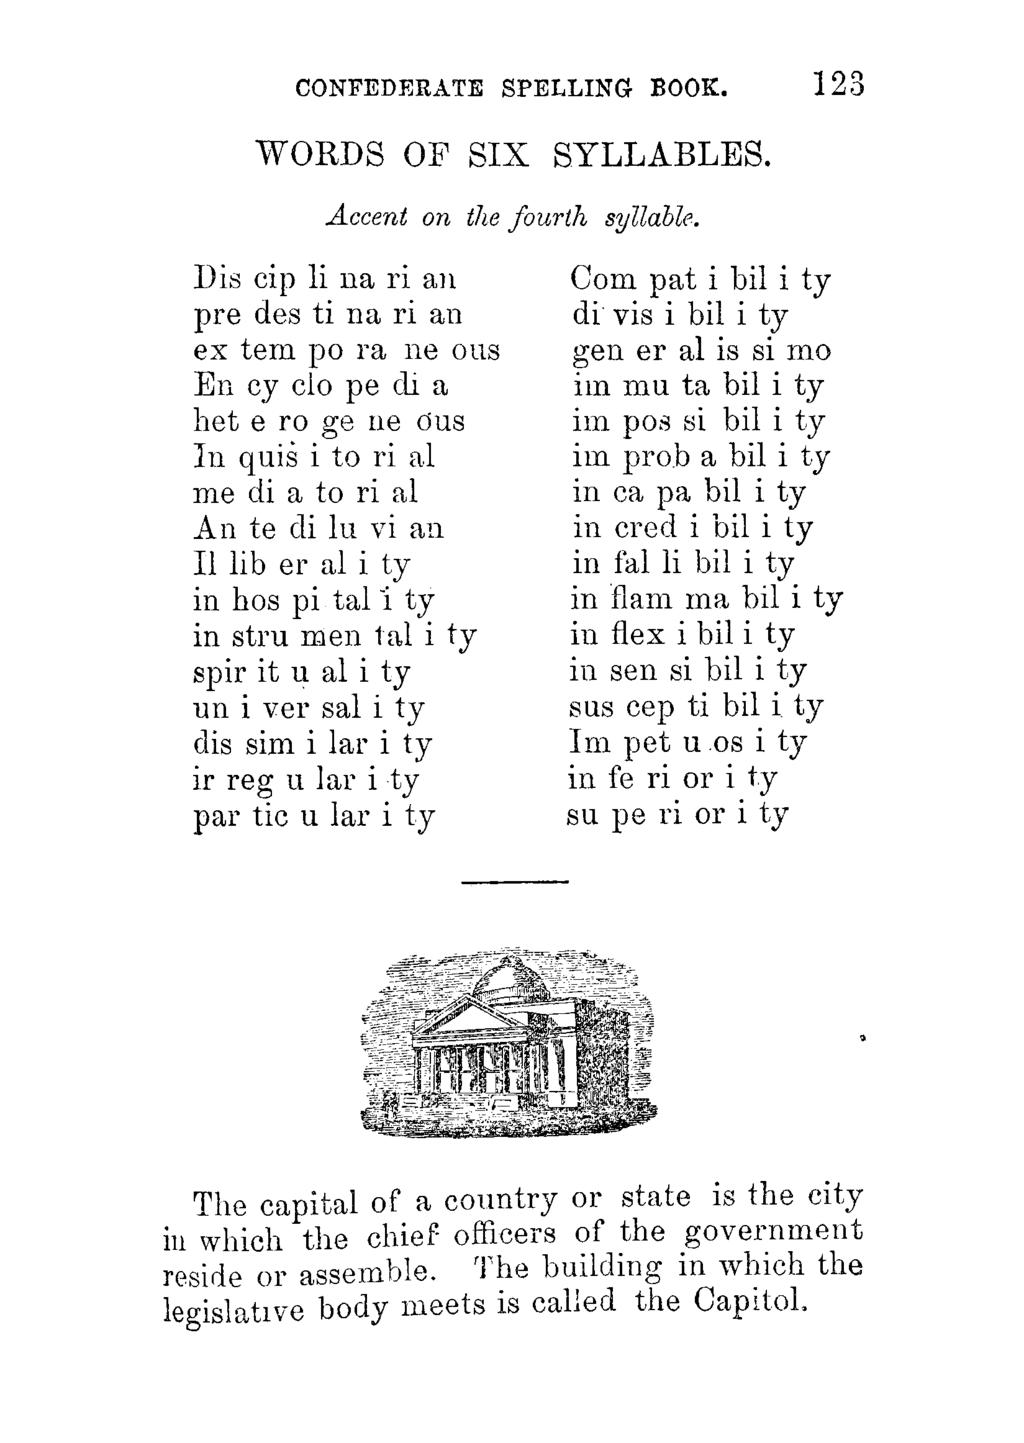 CONFEDERATE SPELLING BOOK. 123 WORDS OF SIX SYLLABLES. Accent on the fourth syllable.